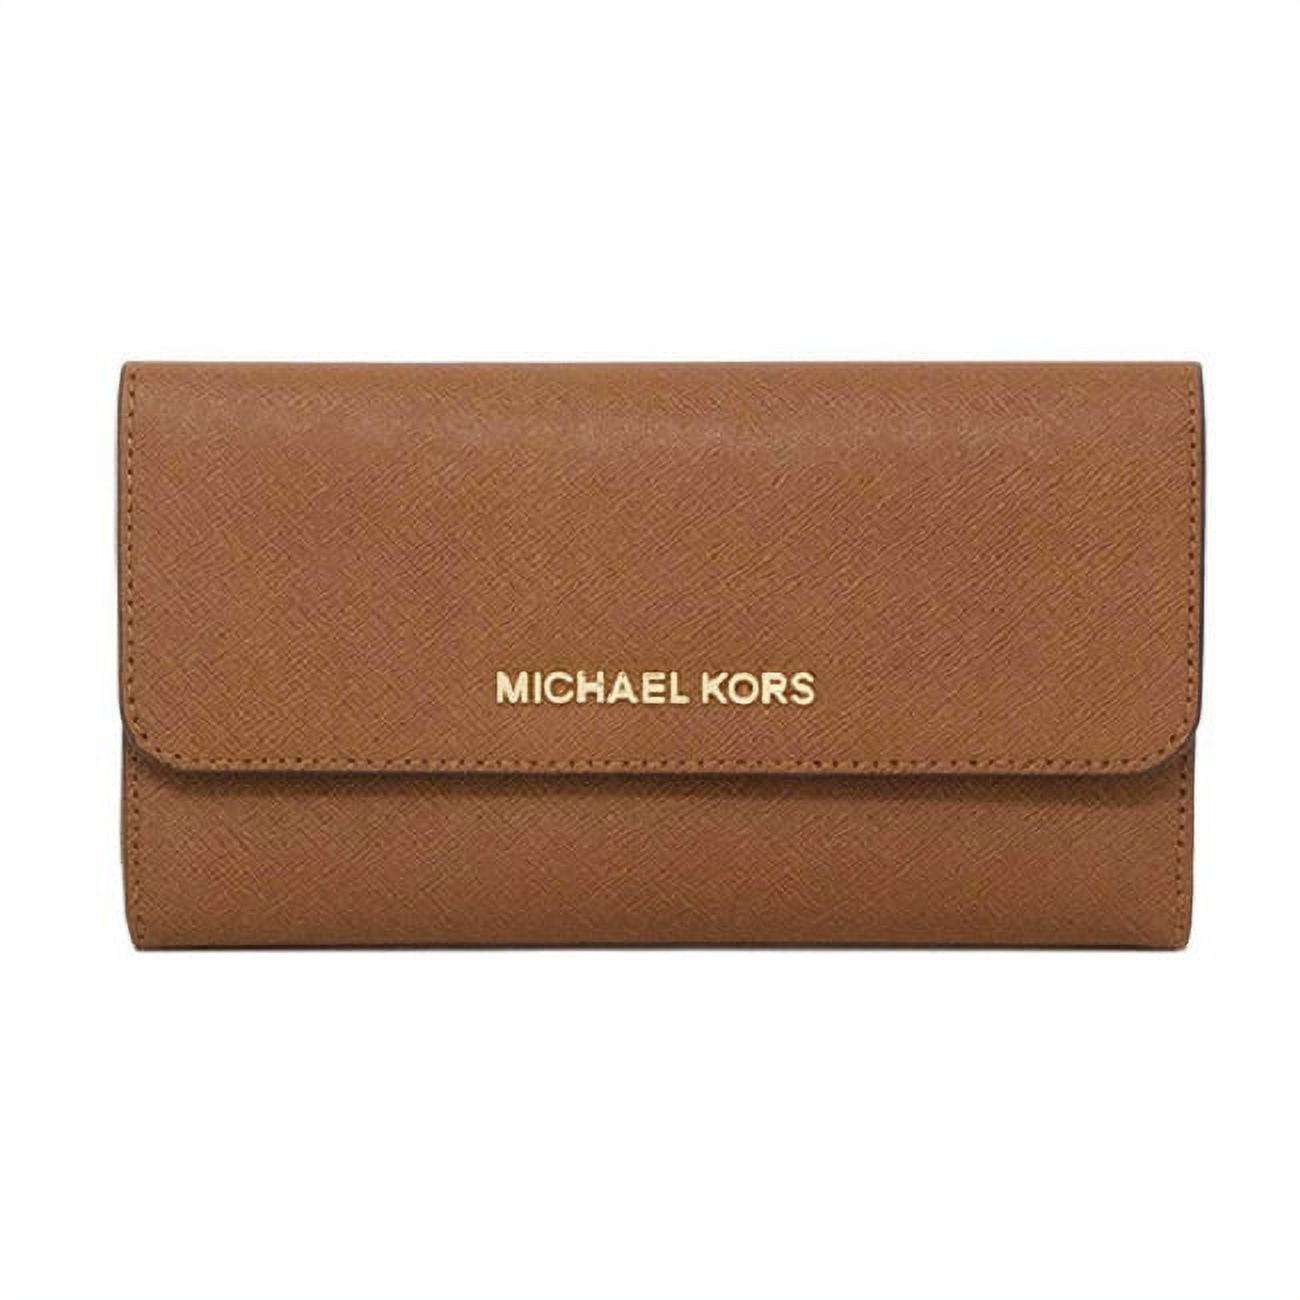 Michael Kors Brown/Tan Signature Coated Canvas And Leather Jet Set